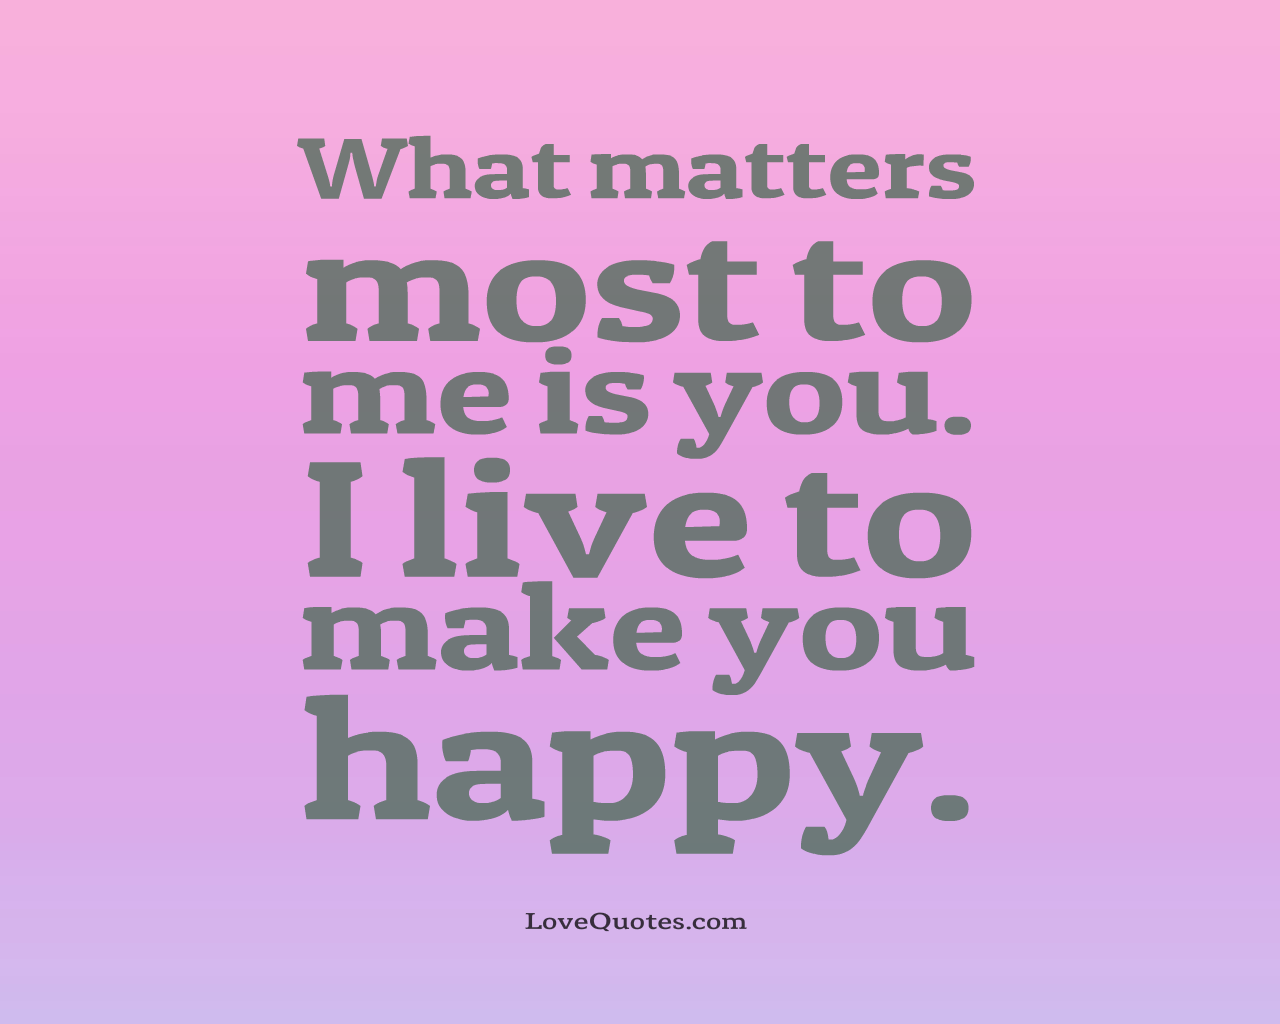 Live To Make You Happy